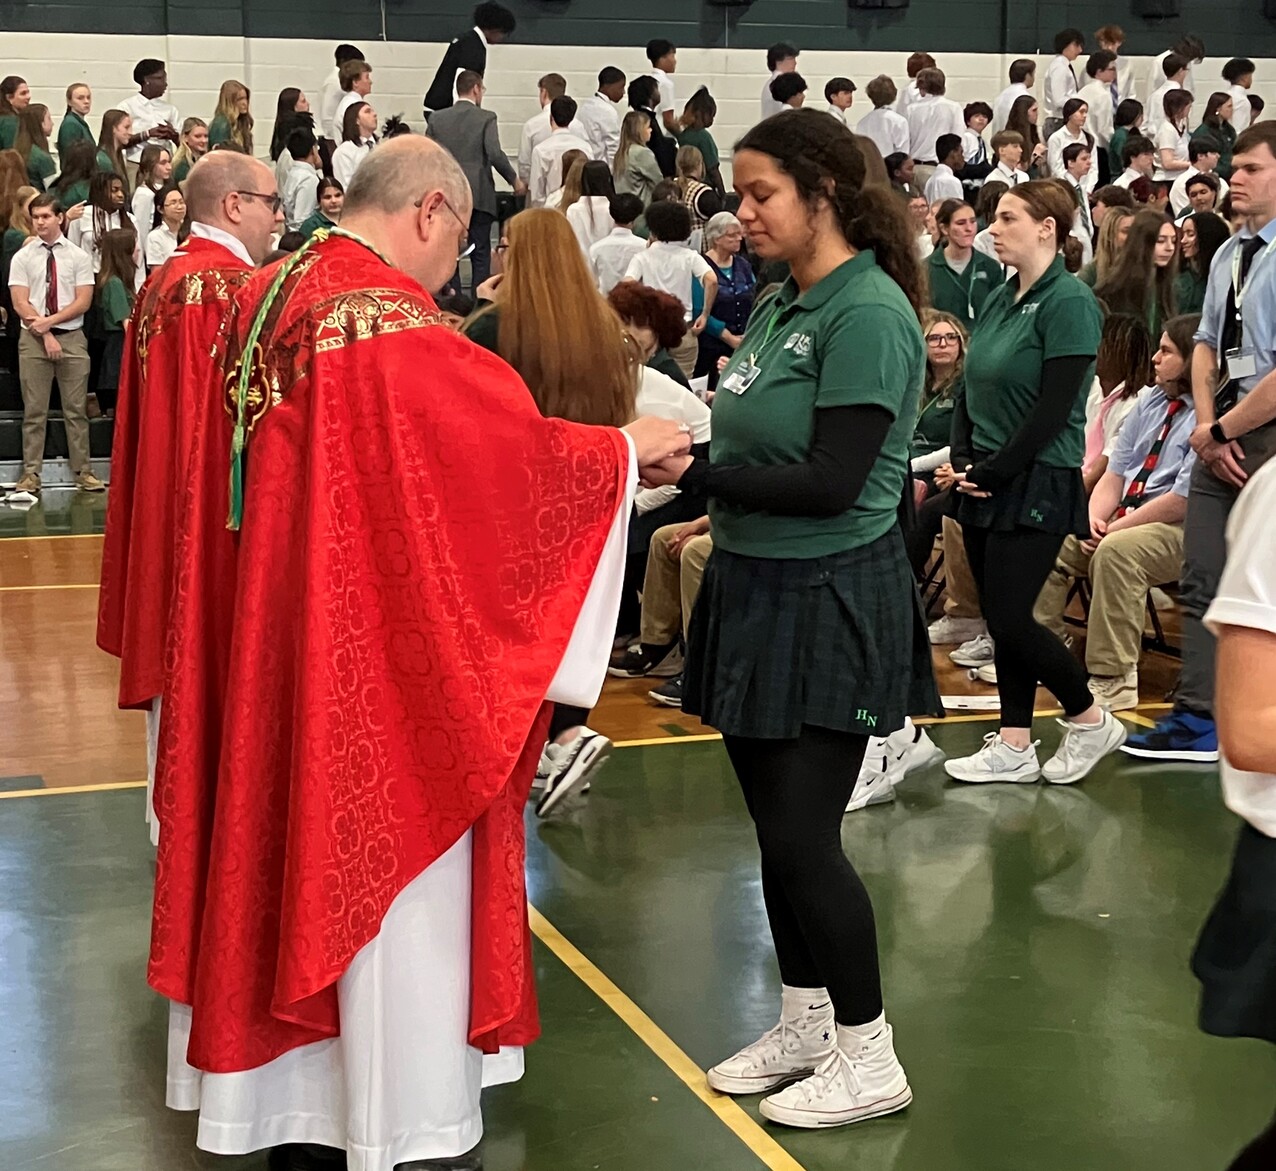 Holy Name High School welcomes Bishop Malesic to campus 